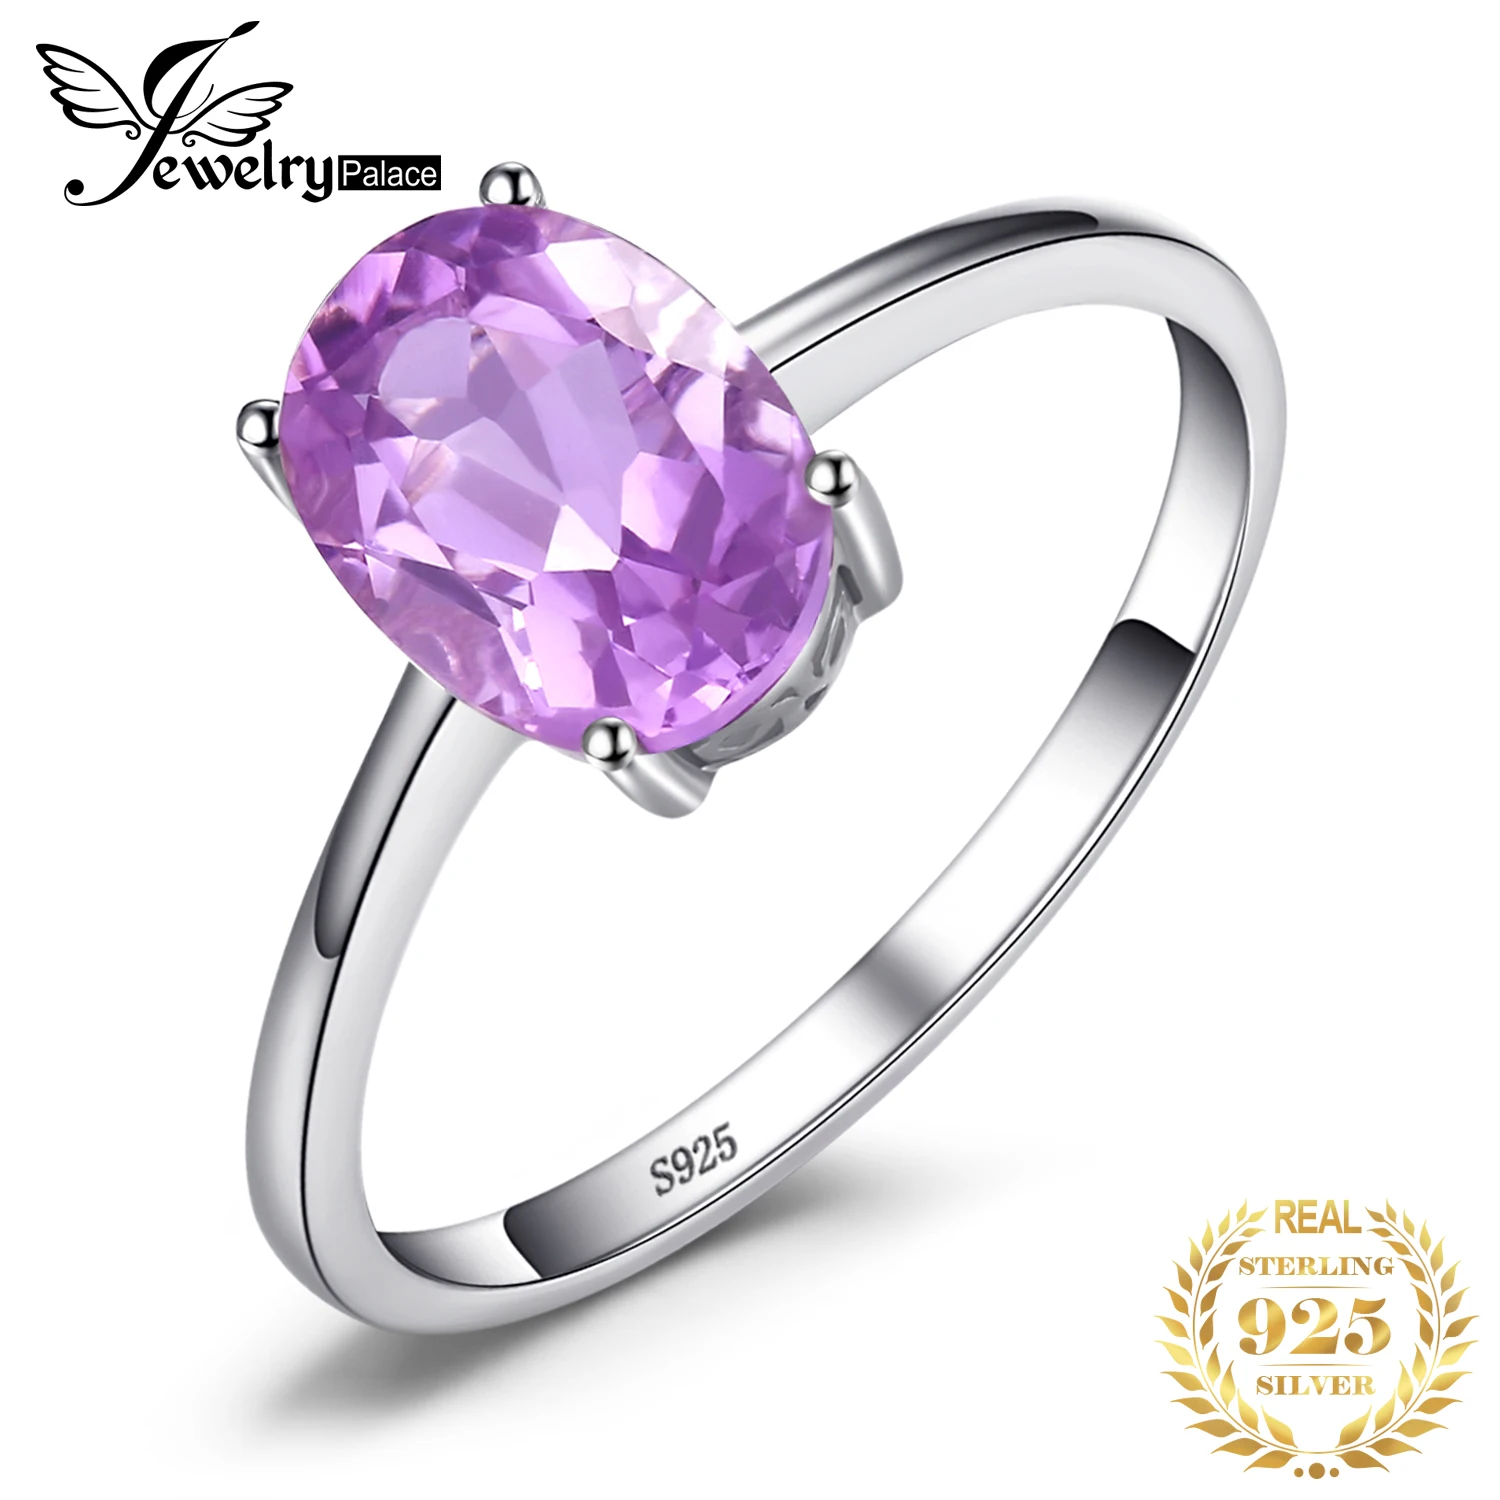 Solid 925 Sterling Silver Tarnish Free Ring With Moissanite and Amethyst Moissanite Women's Ring Anniversary Ring Amethyst Ring For Her